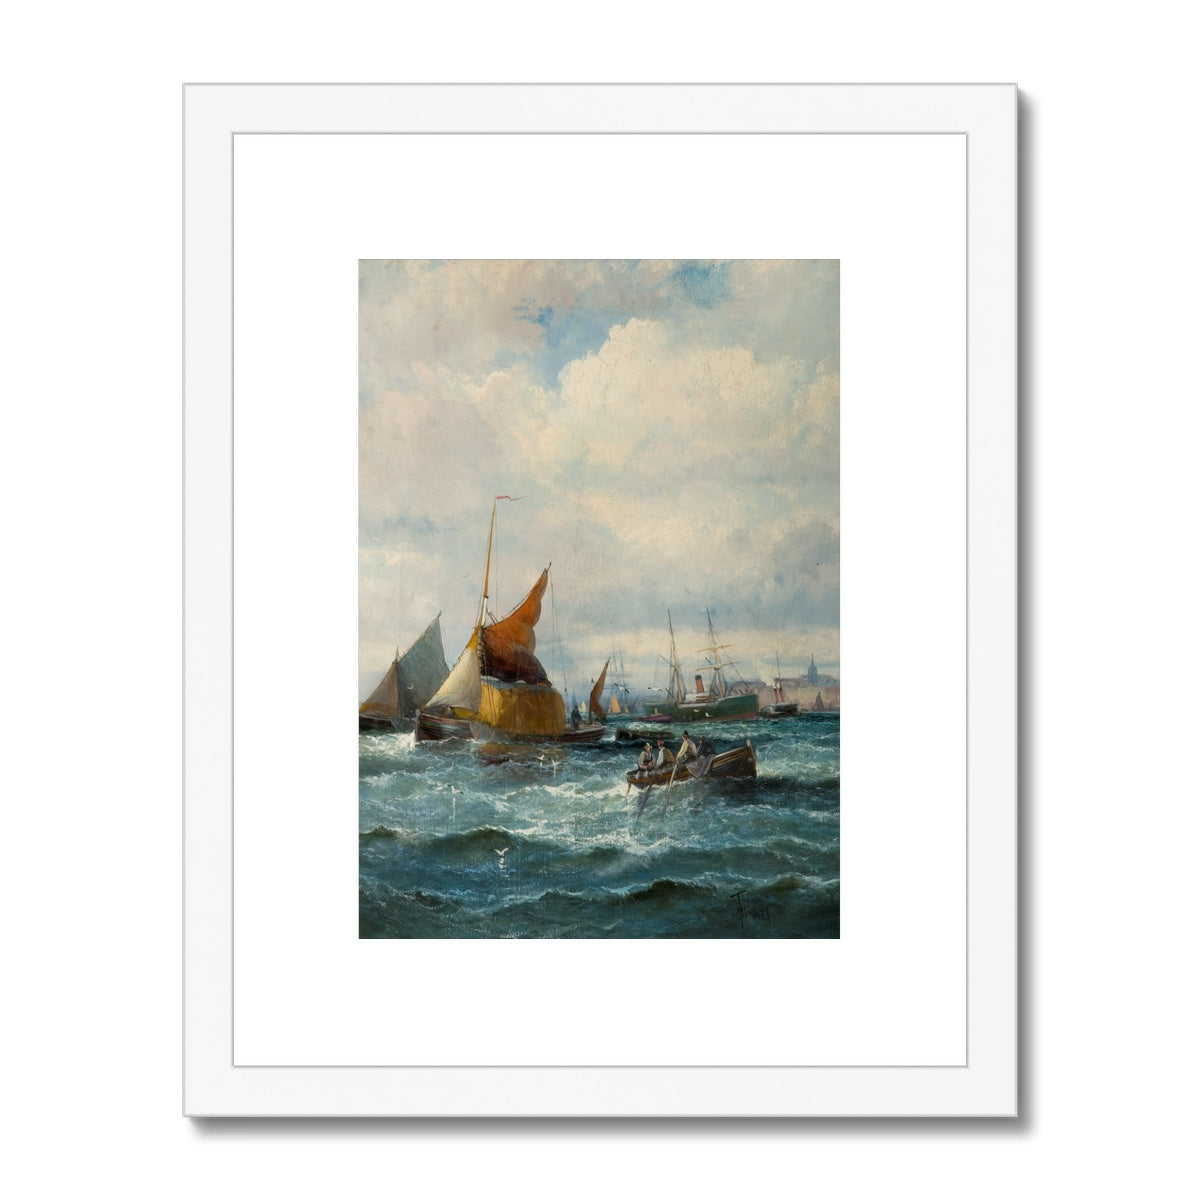 Fine Art Print Framed & Mounted - Shipping off a Headland by Georges Thornley